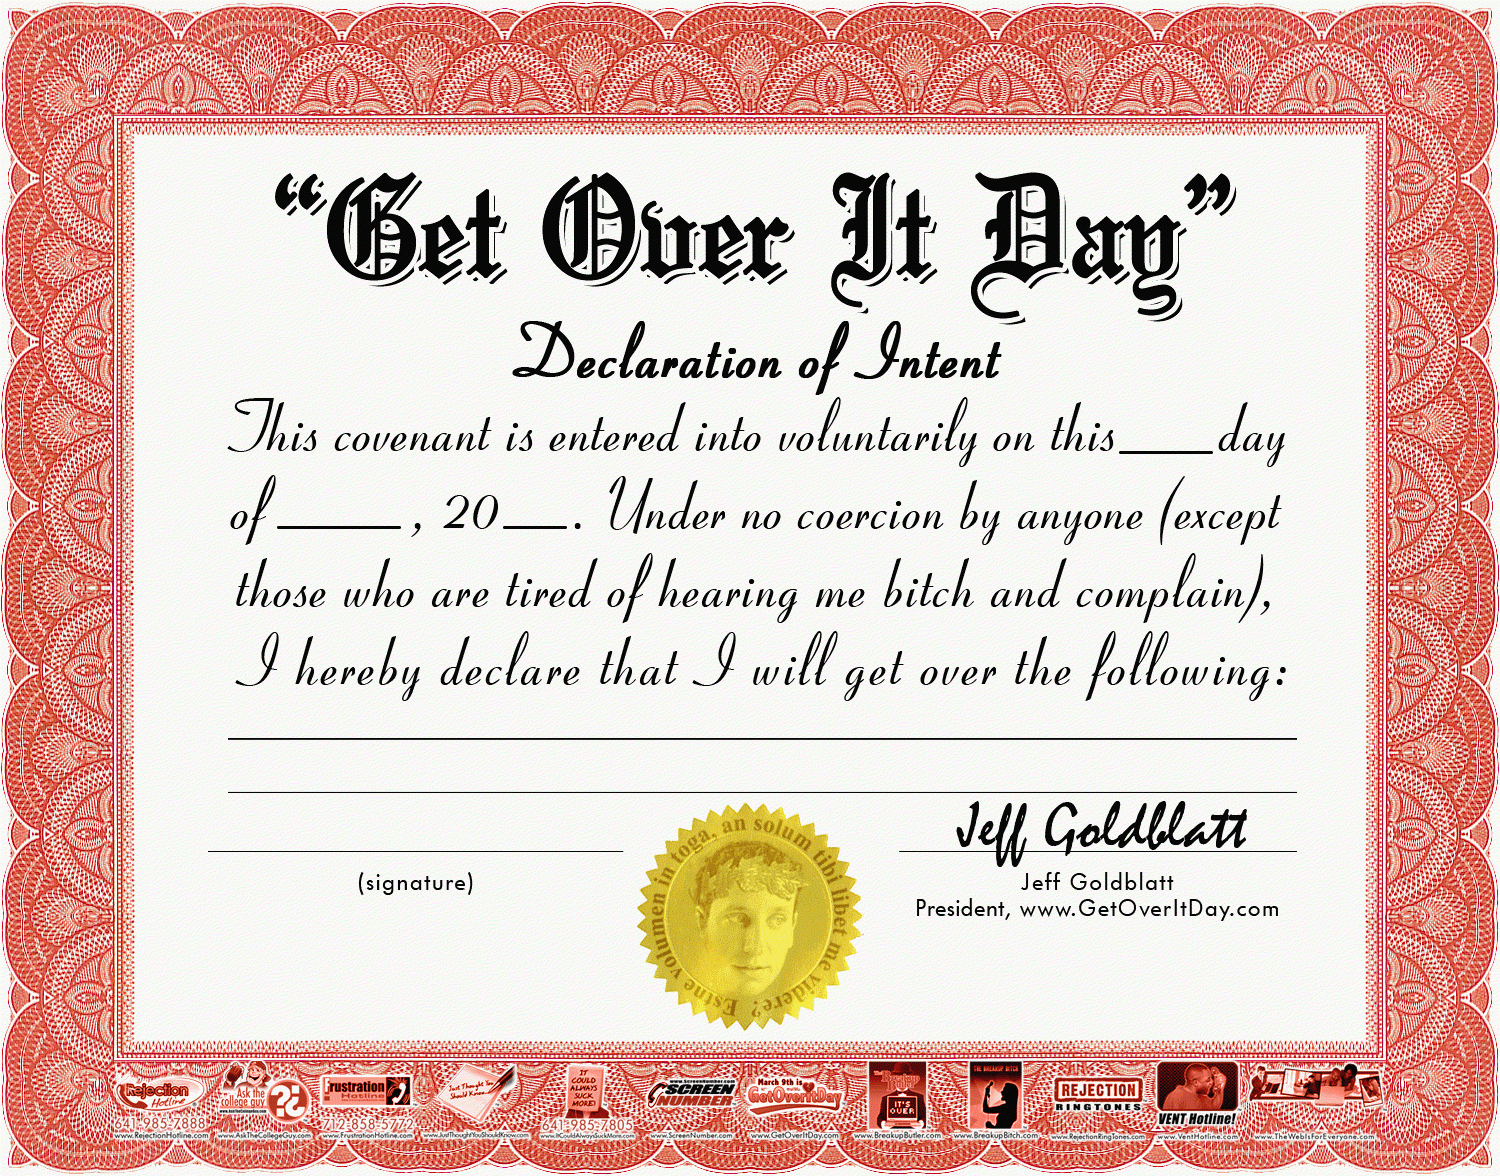 Funny Office Awards Youtube. Silly Certificates Funny Awards Within Funny Certificates For Employees Templates